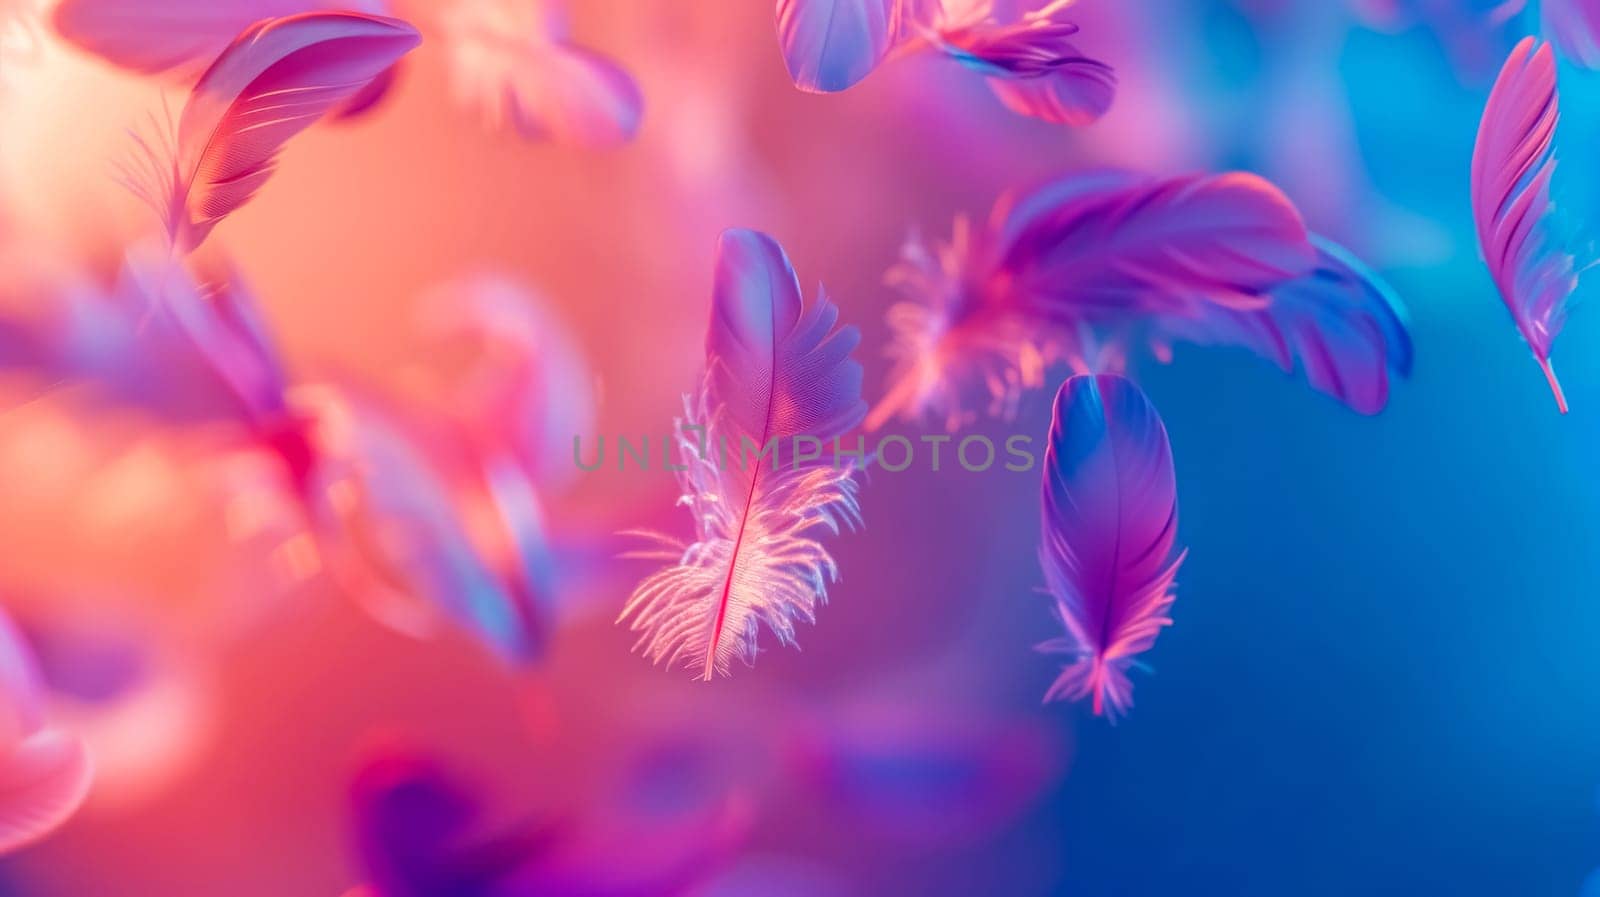 Abstract background of vibrant feathers floating in a dreamy gradient environment by Edophoto